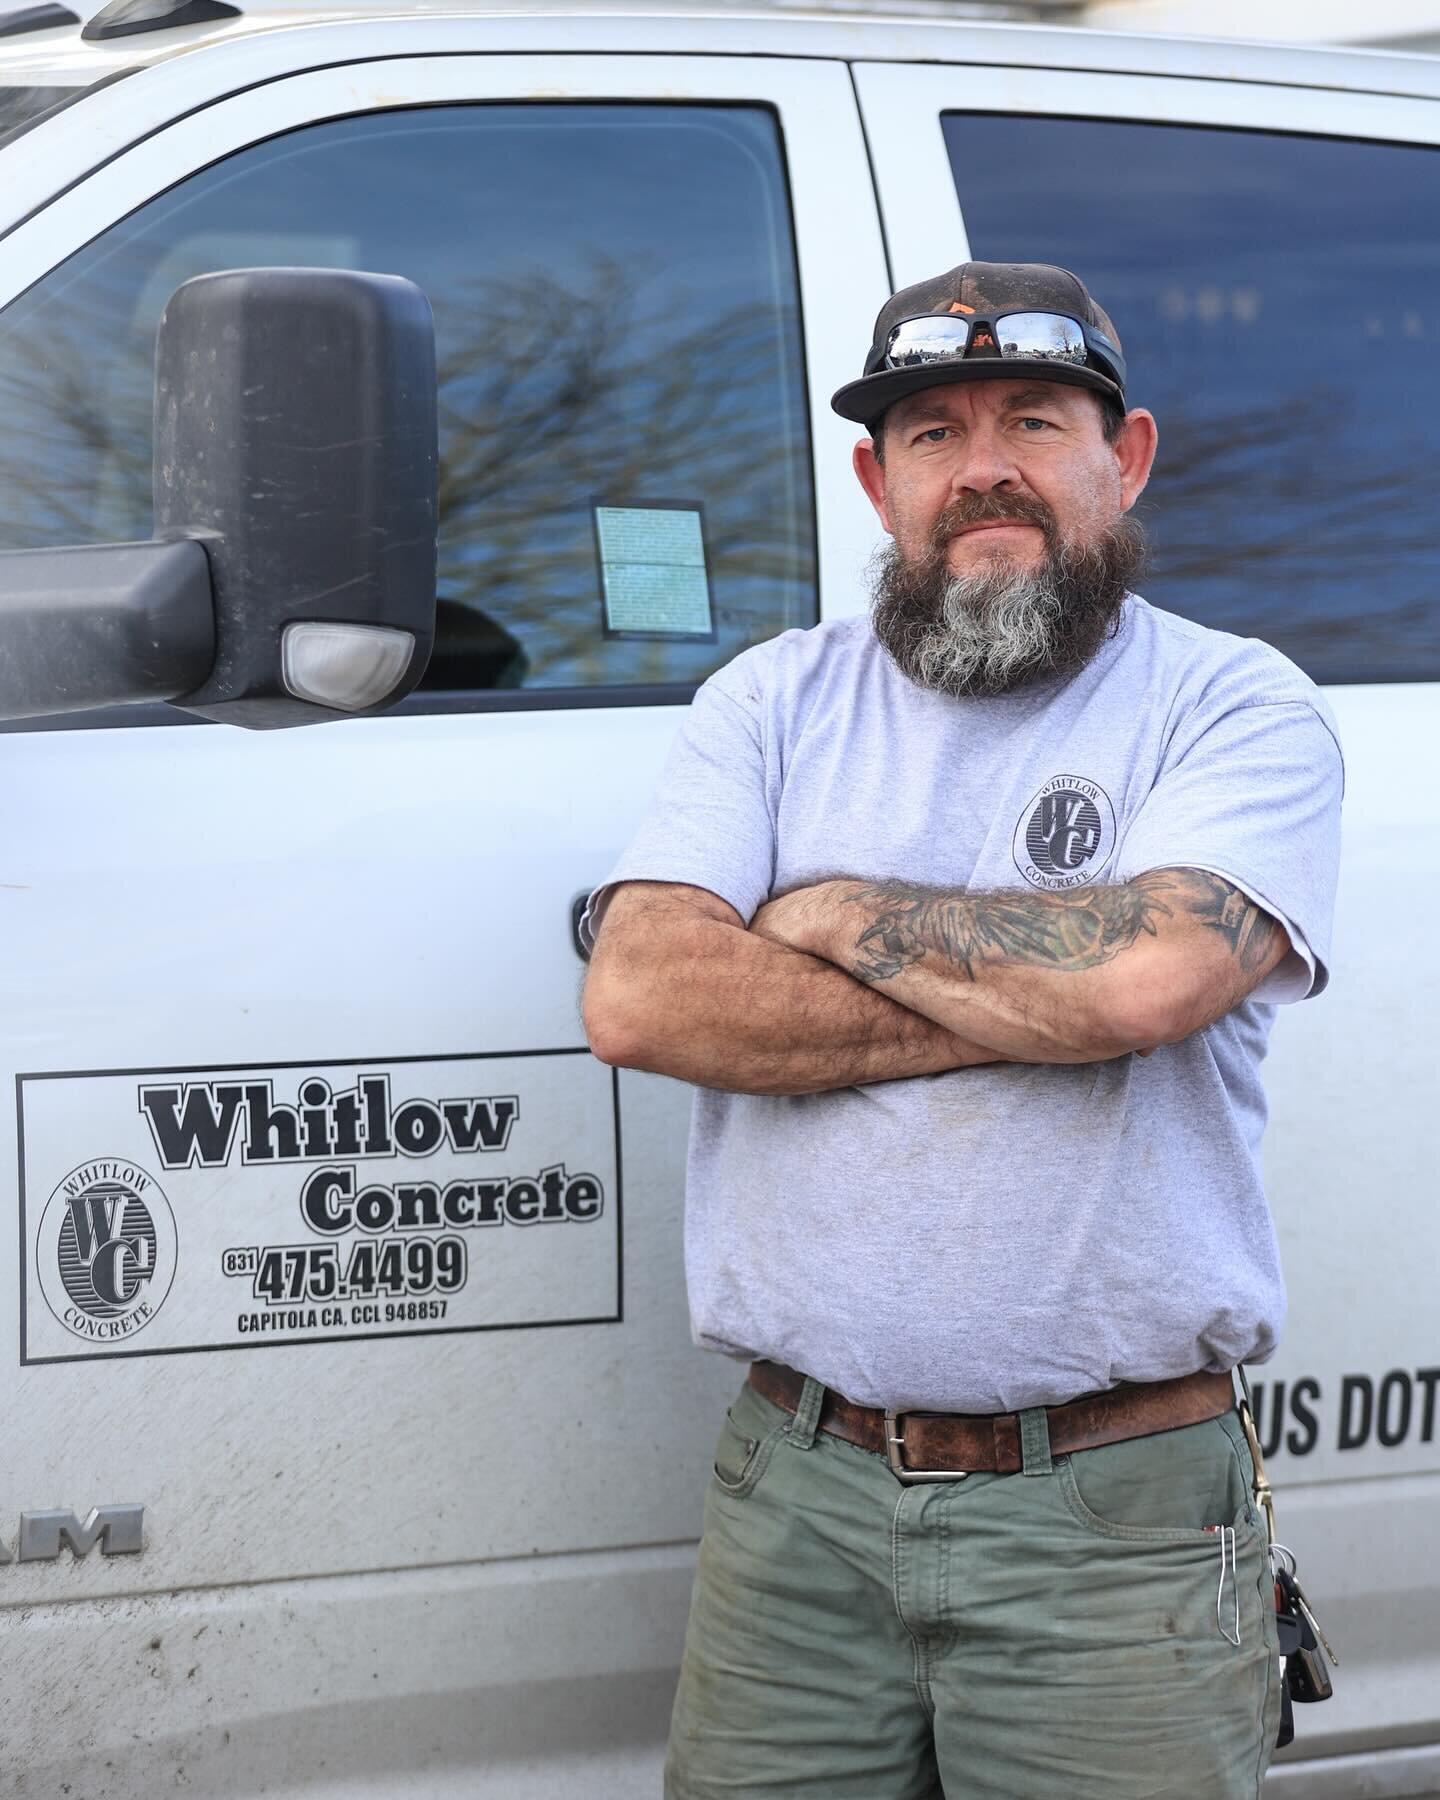 🔦Employee spotlight🔦

Meet Manuel Hernandez! 
He&rsquo;s been a foreman here @whitlowconcrete for the past 24 years! His favorite thing about working @whitlowconcrete is that we always work together as a team! In his free time he enjoys hanging out